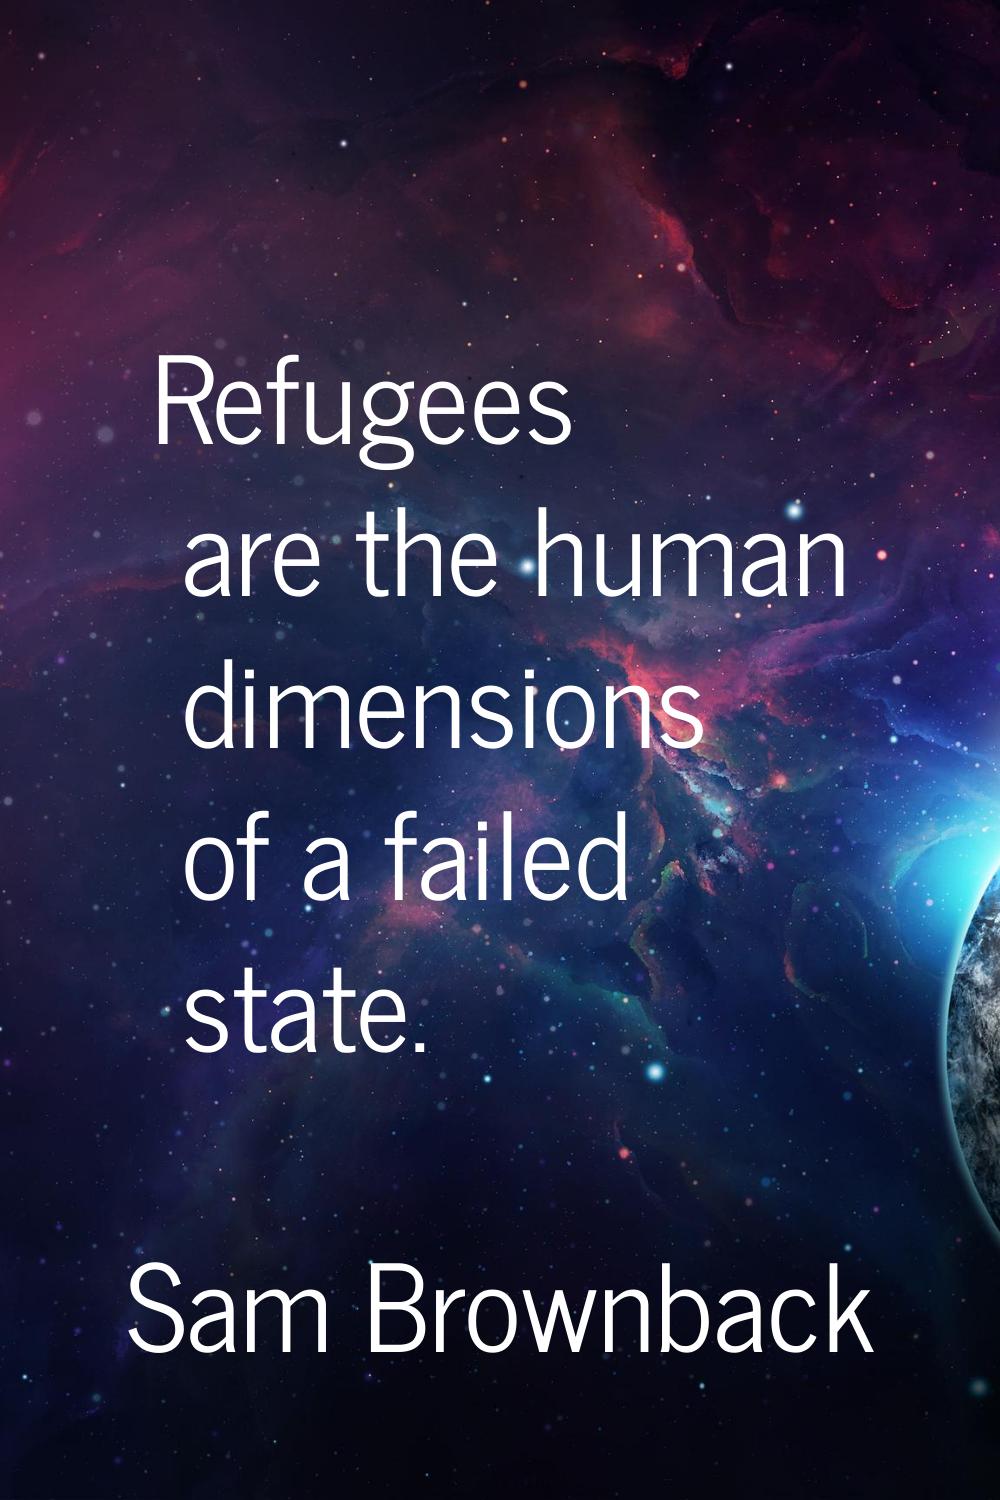 Refugees are the human dimensions of a failed state.